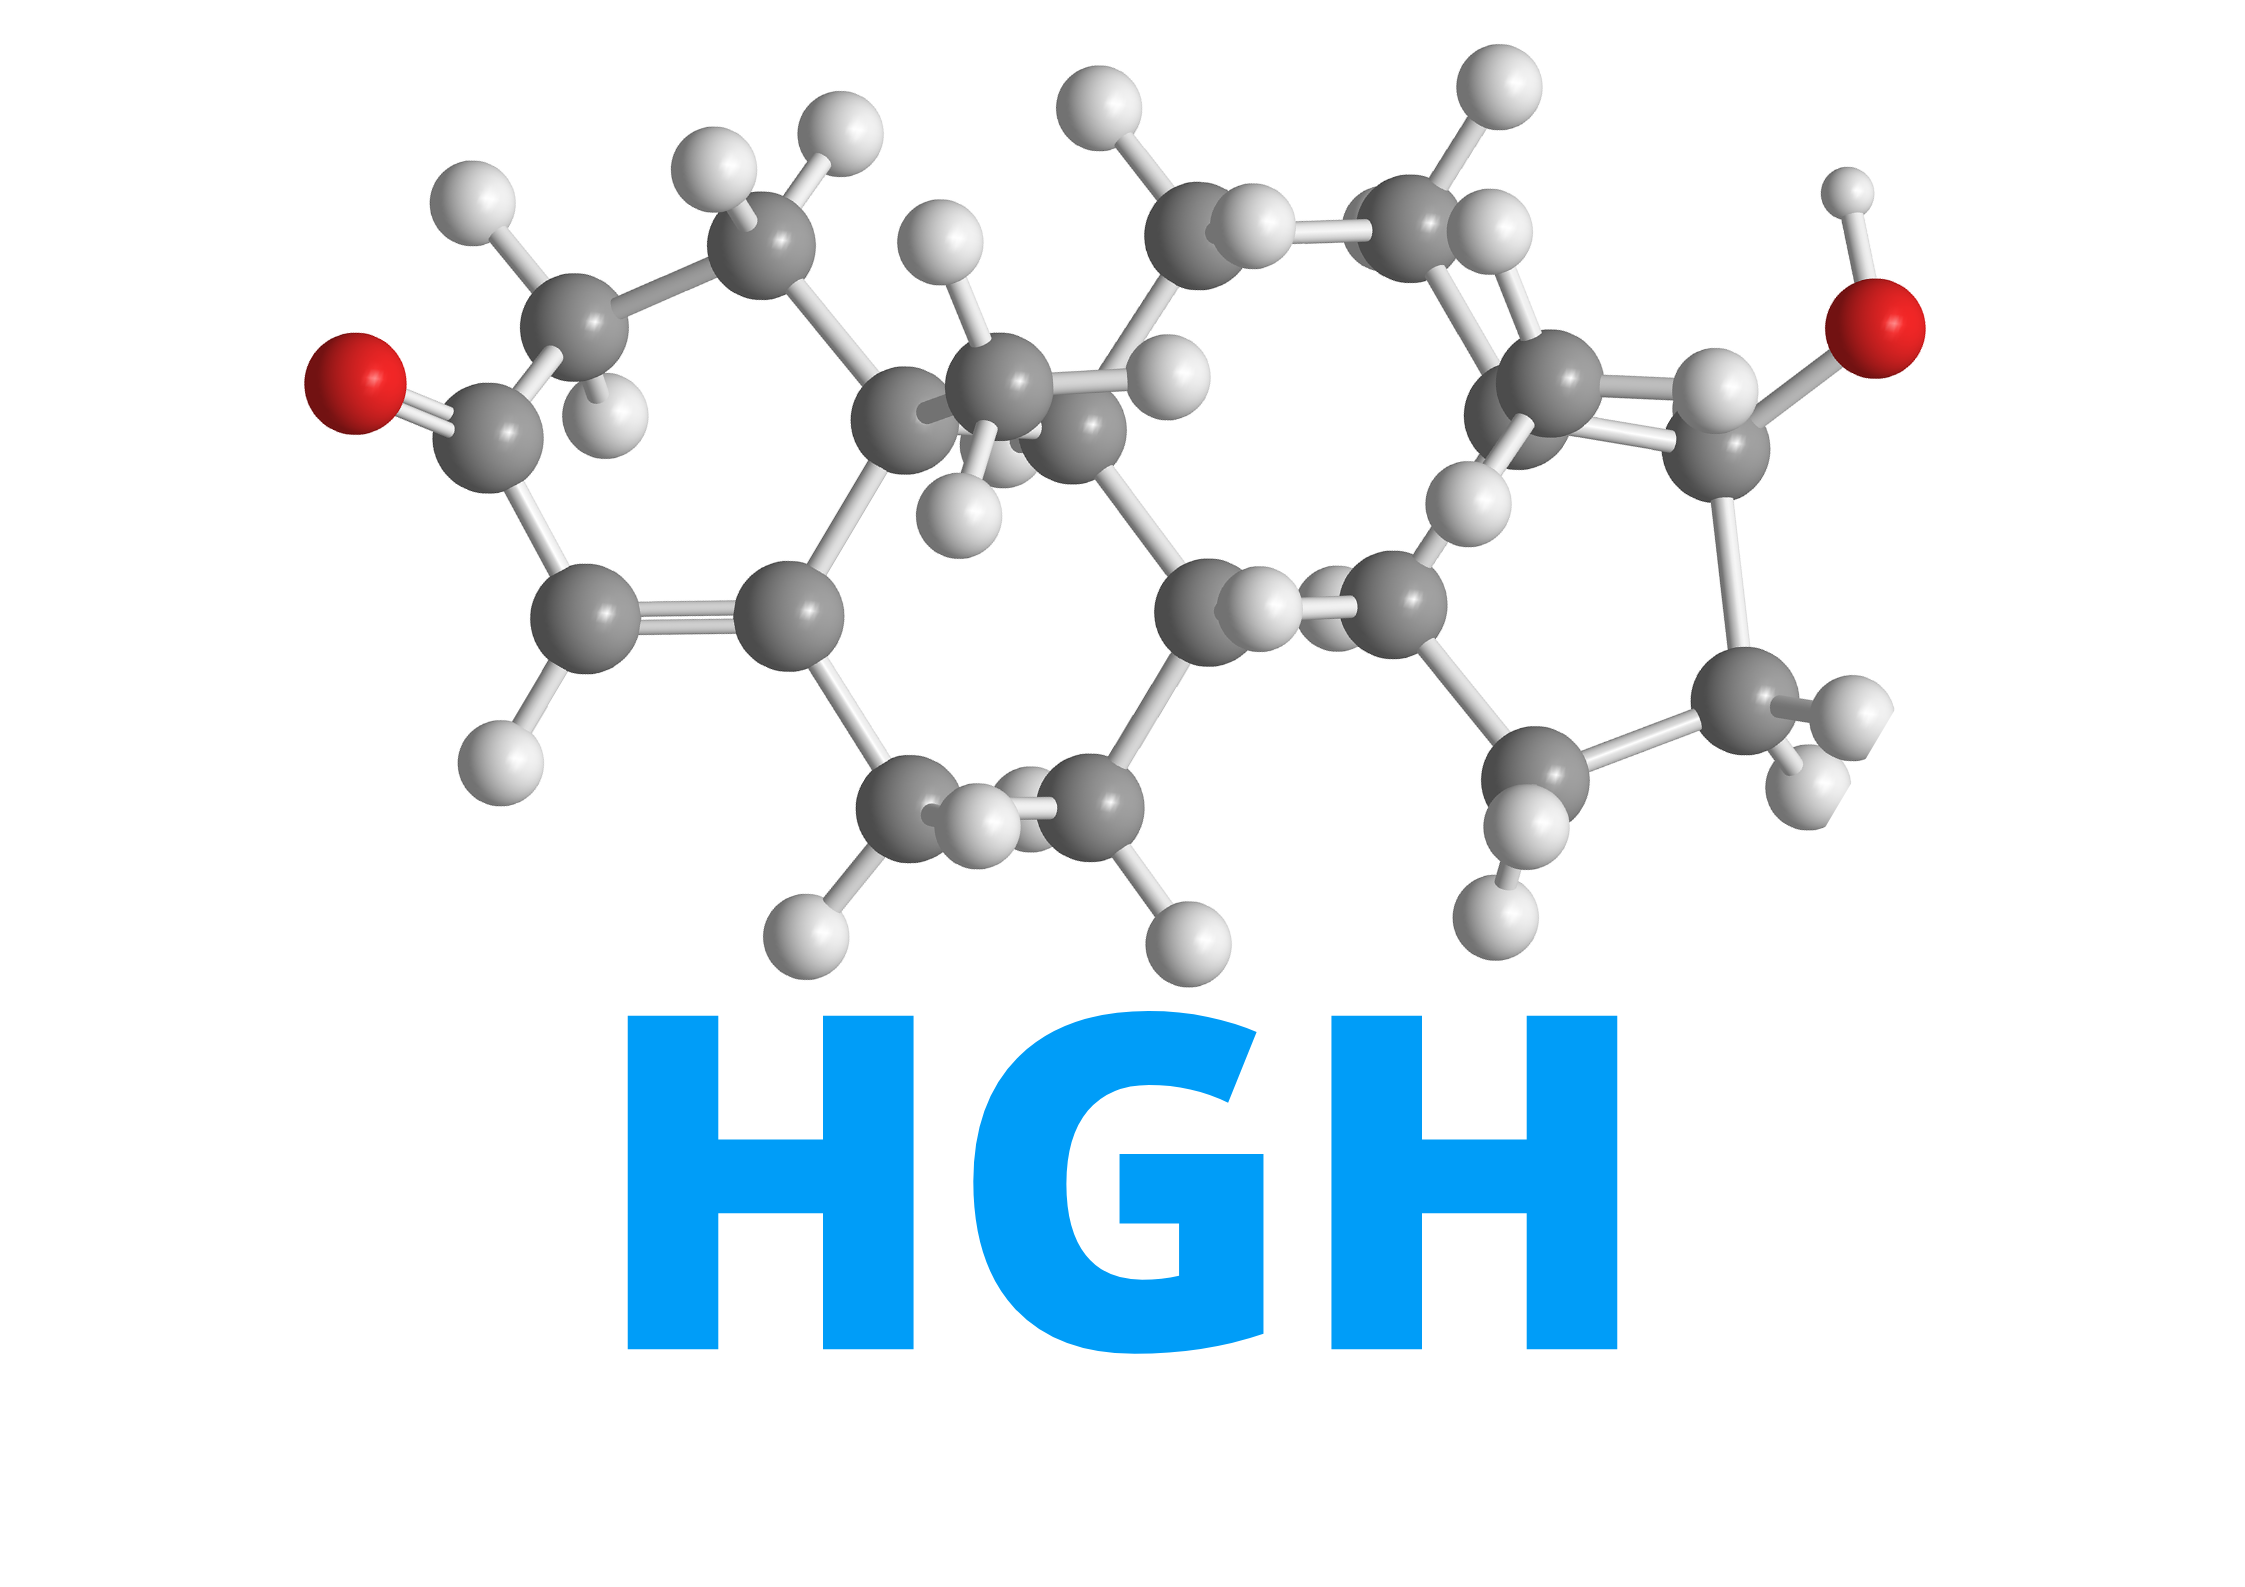 Human Growth Hormone (HGH) Health Benefits And Anti Aging